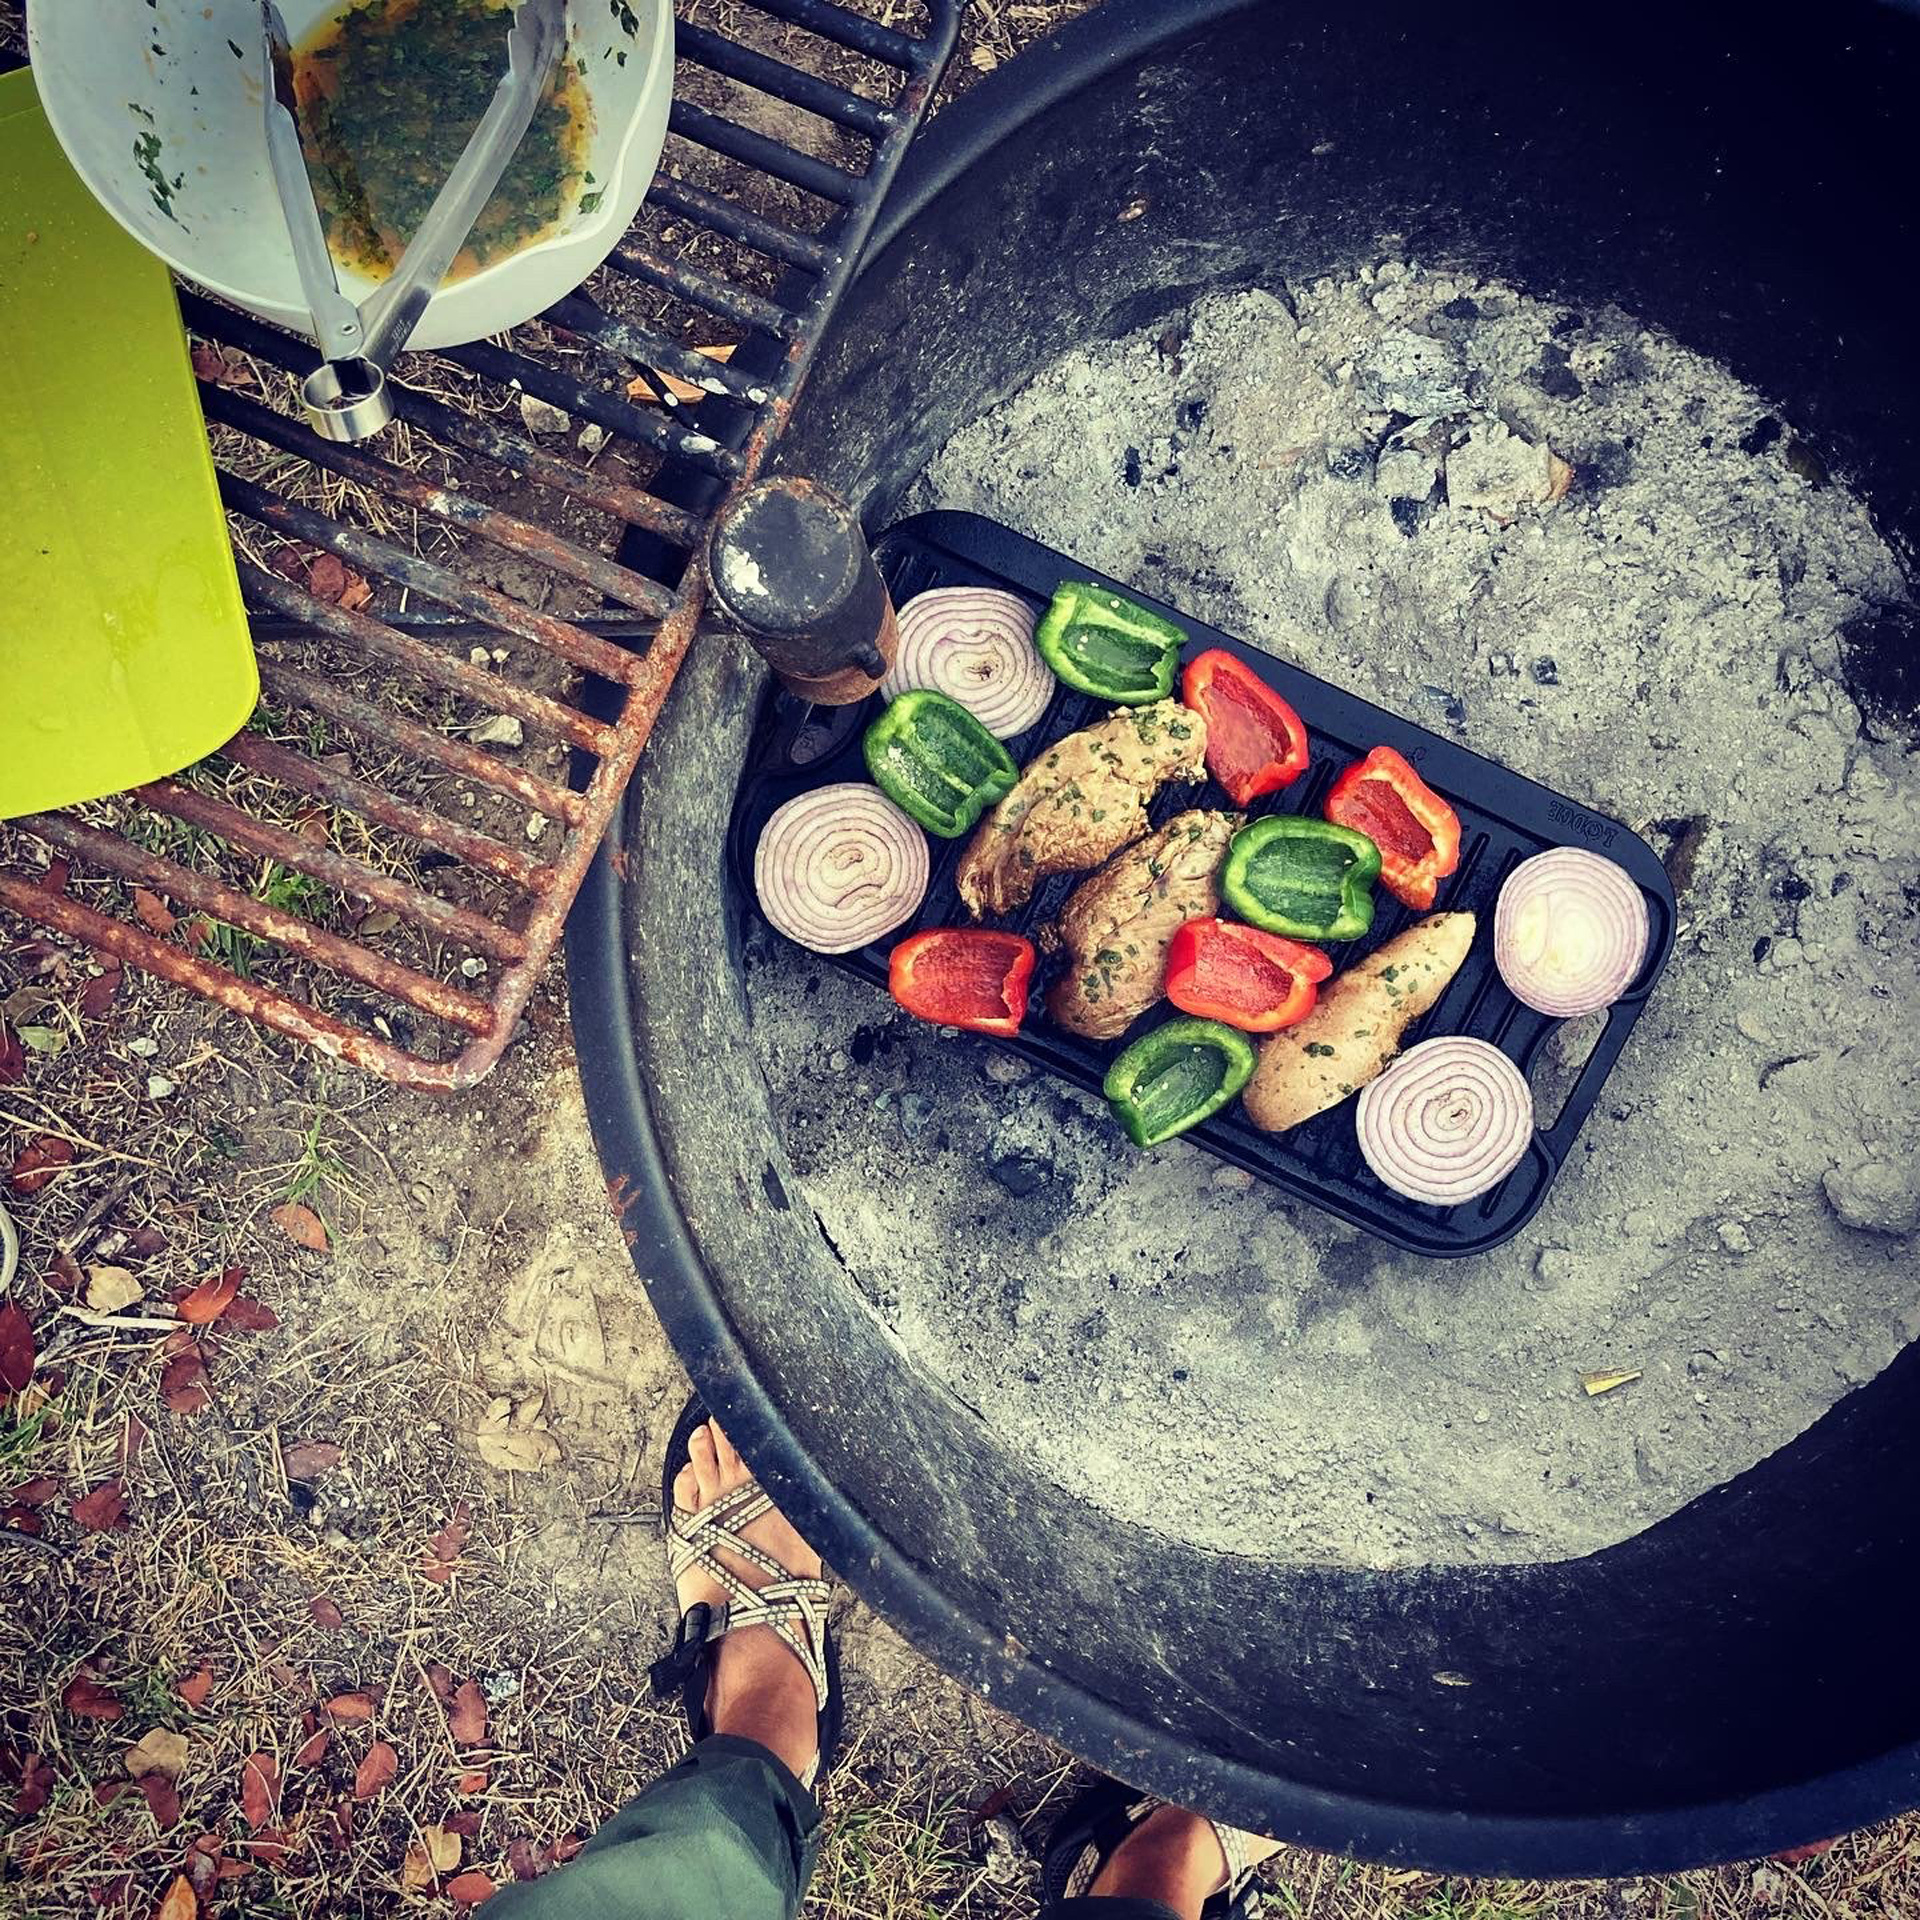 Fajitas being cooked over a fire.